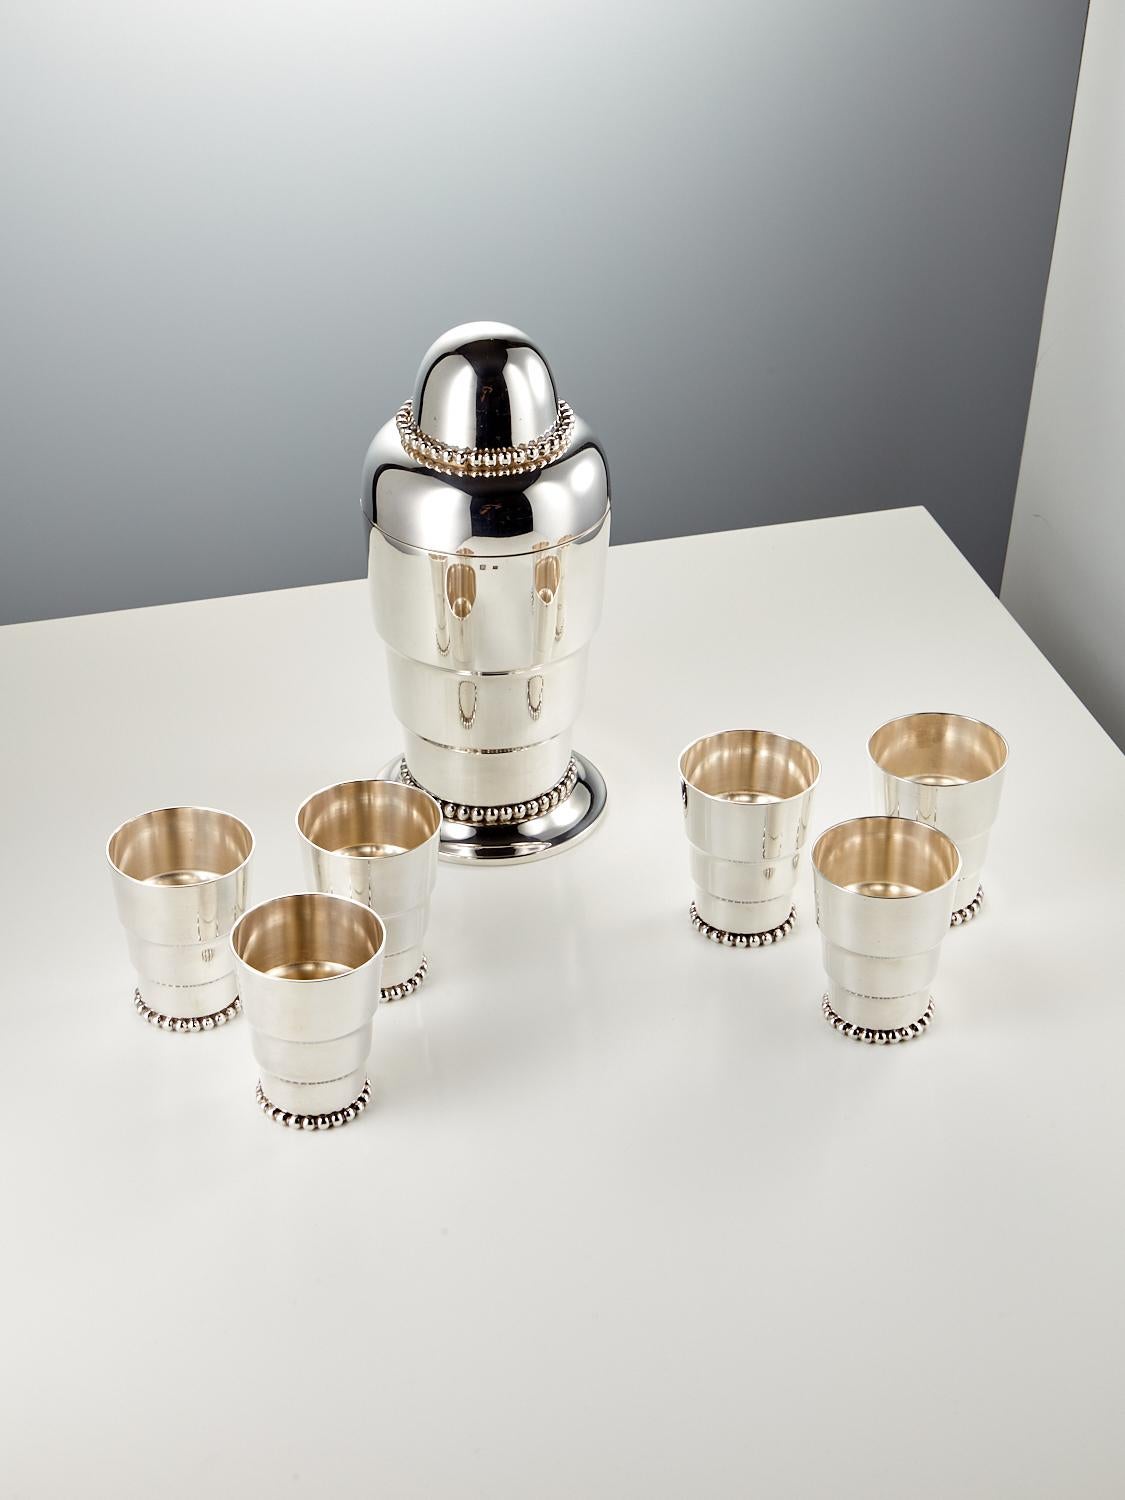 A 20th Century Art Deco Cocktail shaker set with six cups Date, Circa 1920. Origin Austria.

A wonderful decorative large cocktail shaker with matching beakers. The set is of a great quality and in excellent condition.
The shaker is a great size and